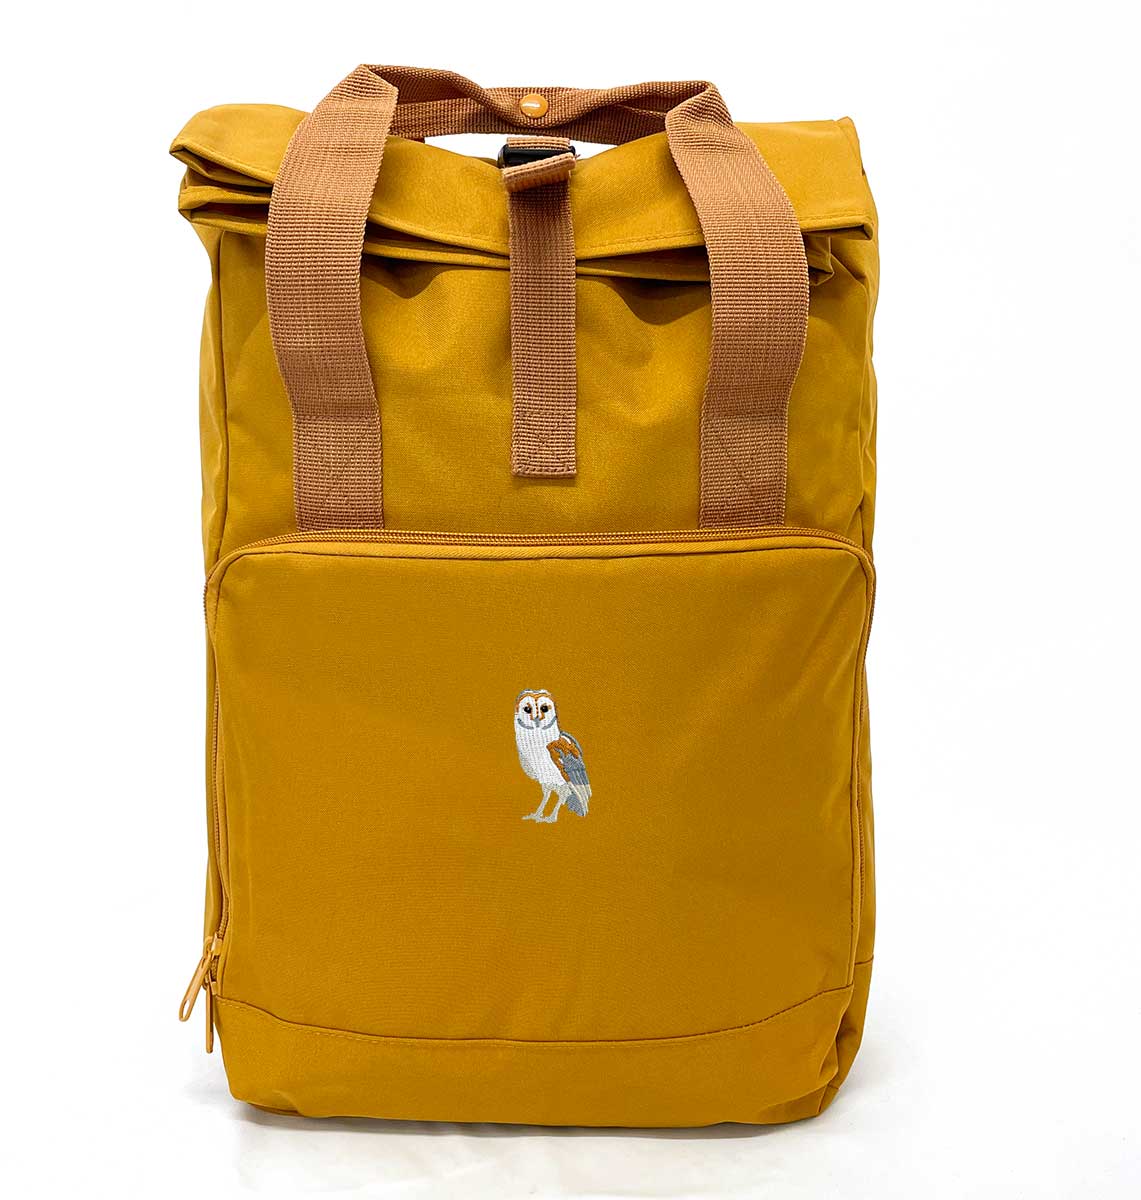 Barn Owl Large Roll-top Laptop Recycled Backpack - Blue Panda